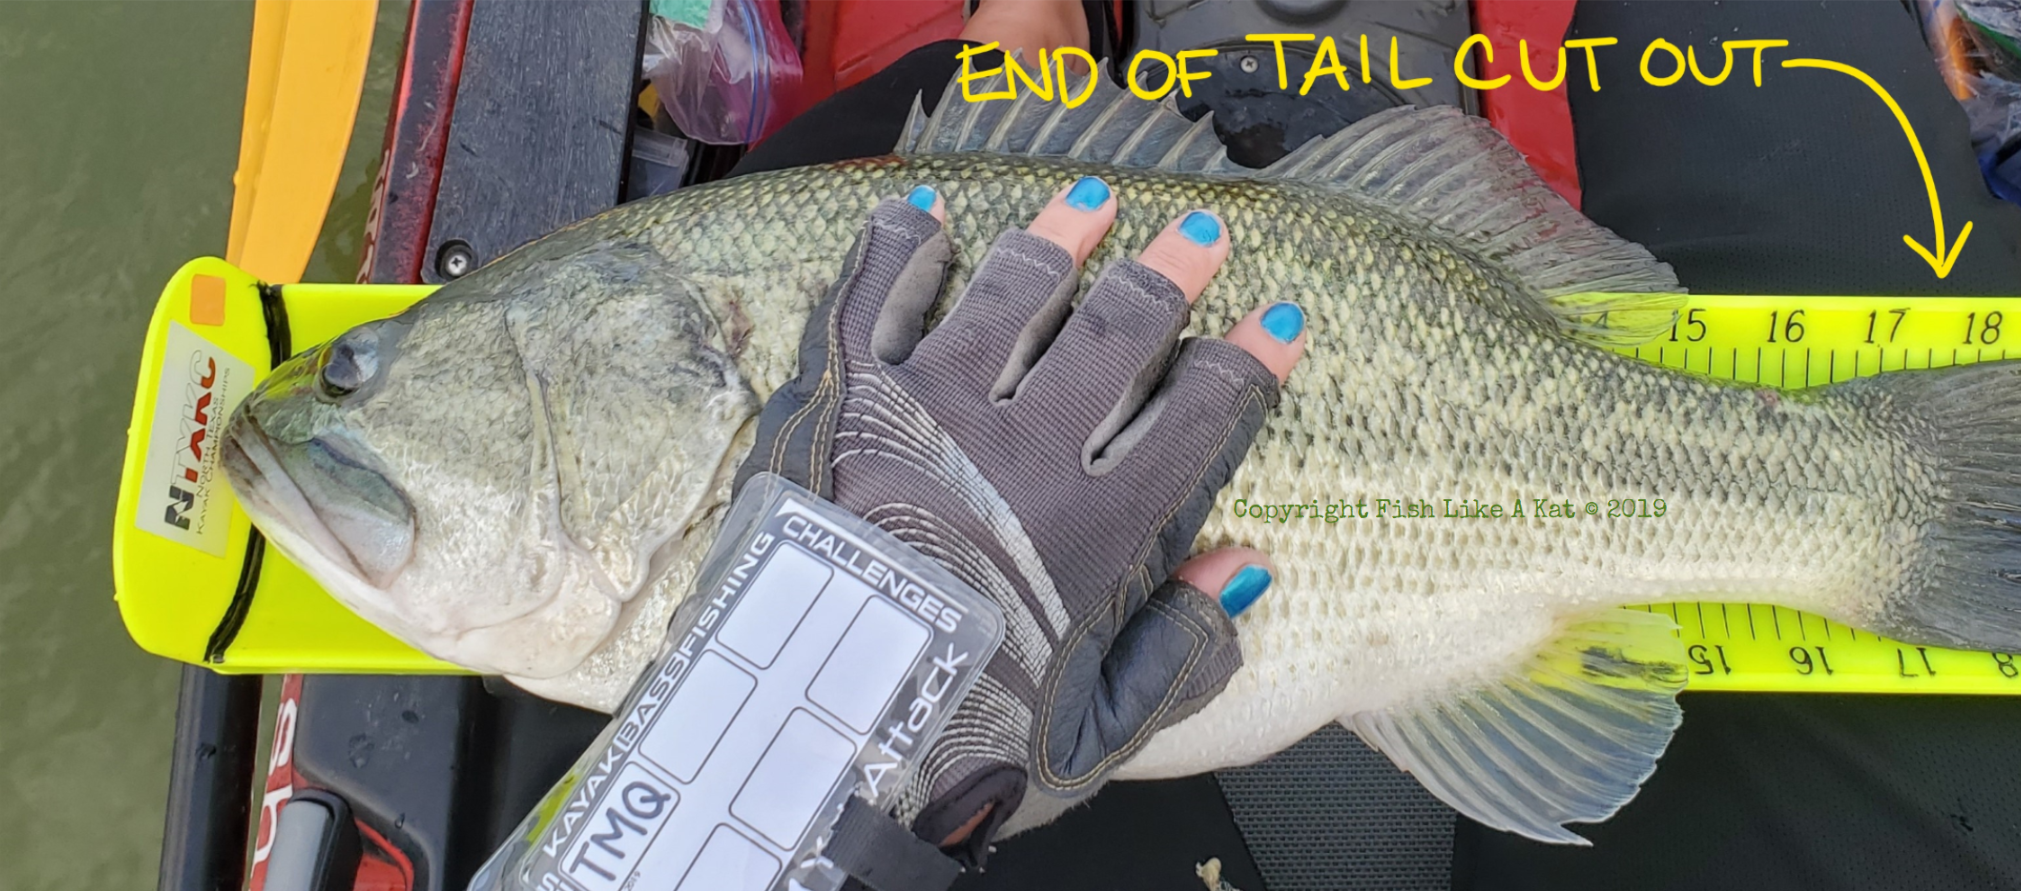 Fish being measured on a Hawg Trough with its tail cut out of the picture